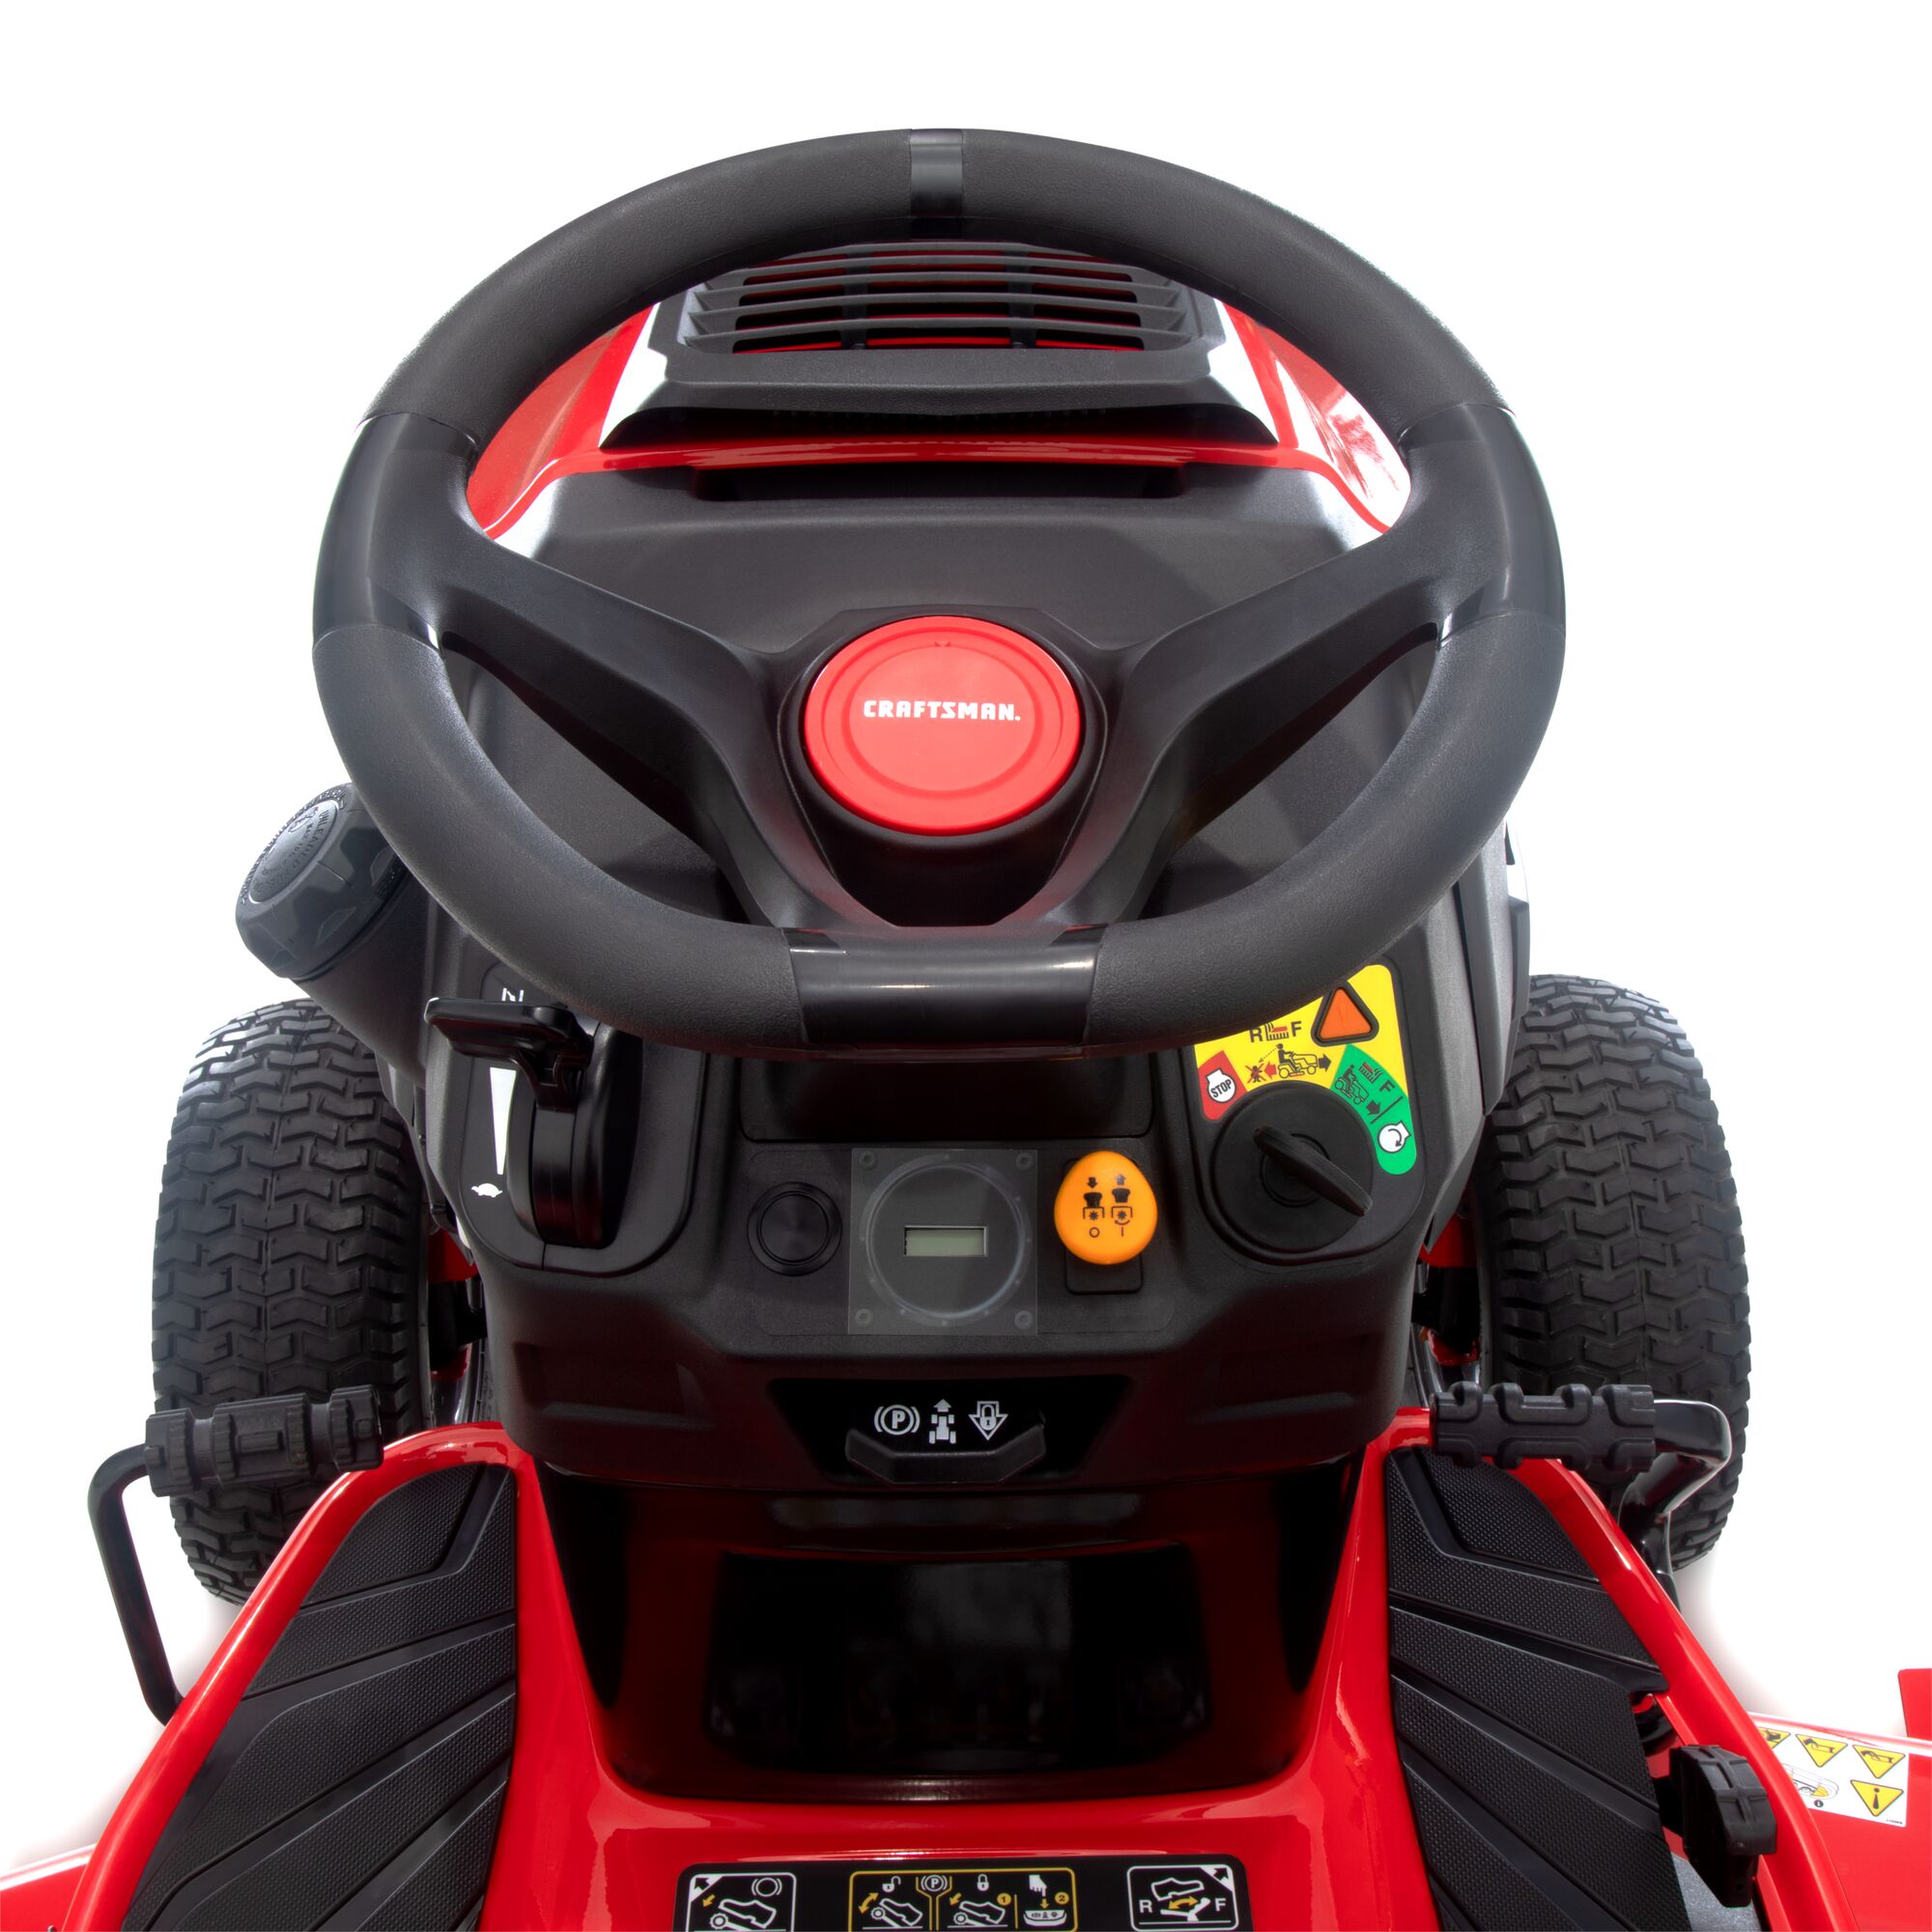 View of CRAFTSMAN Riding Mowers highlighting product features